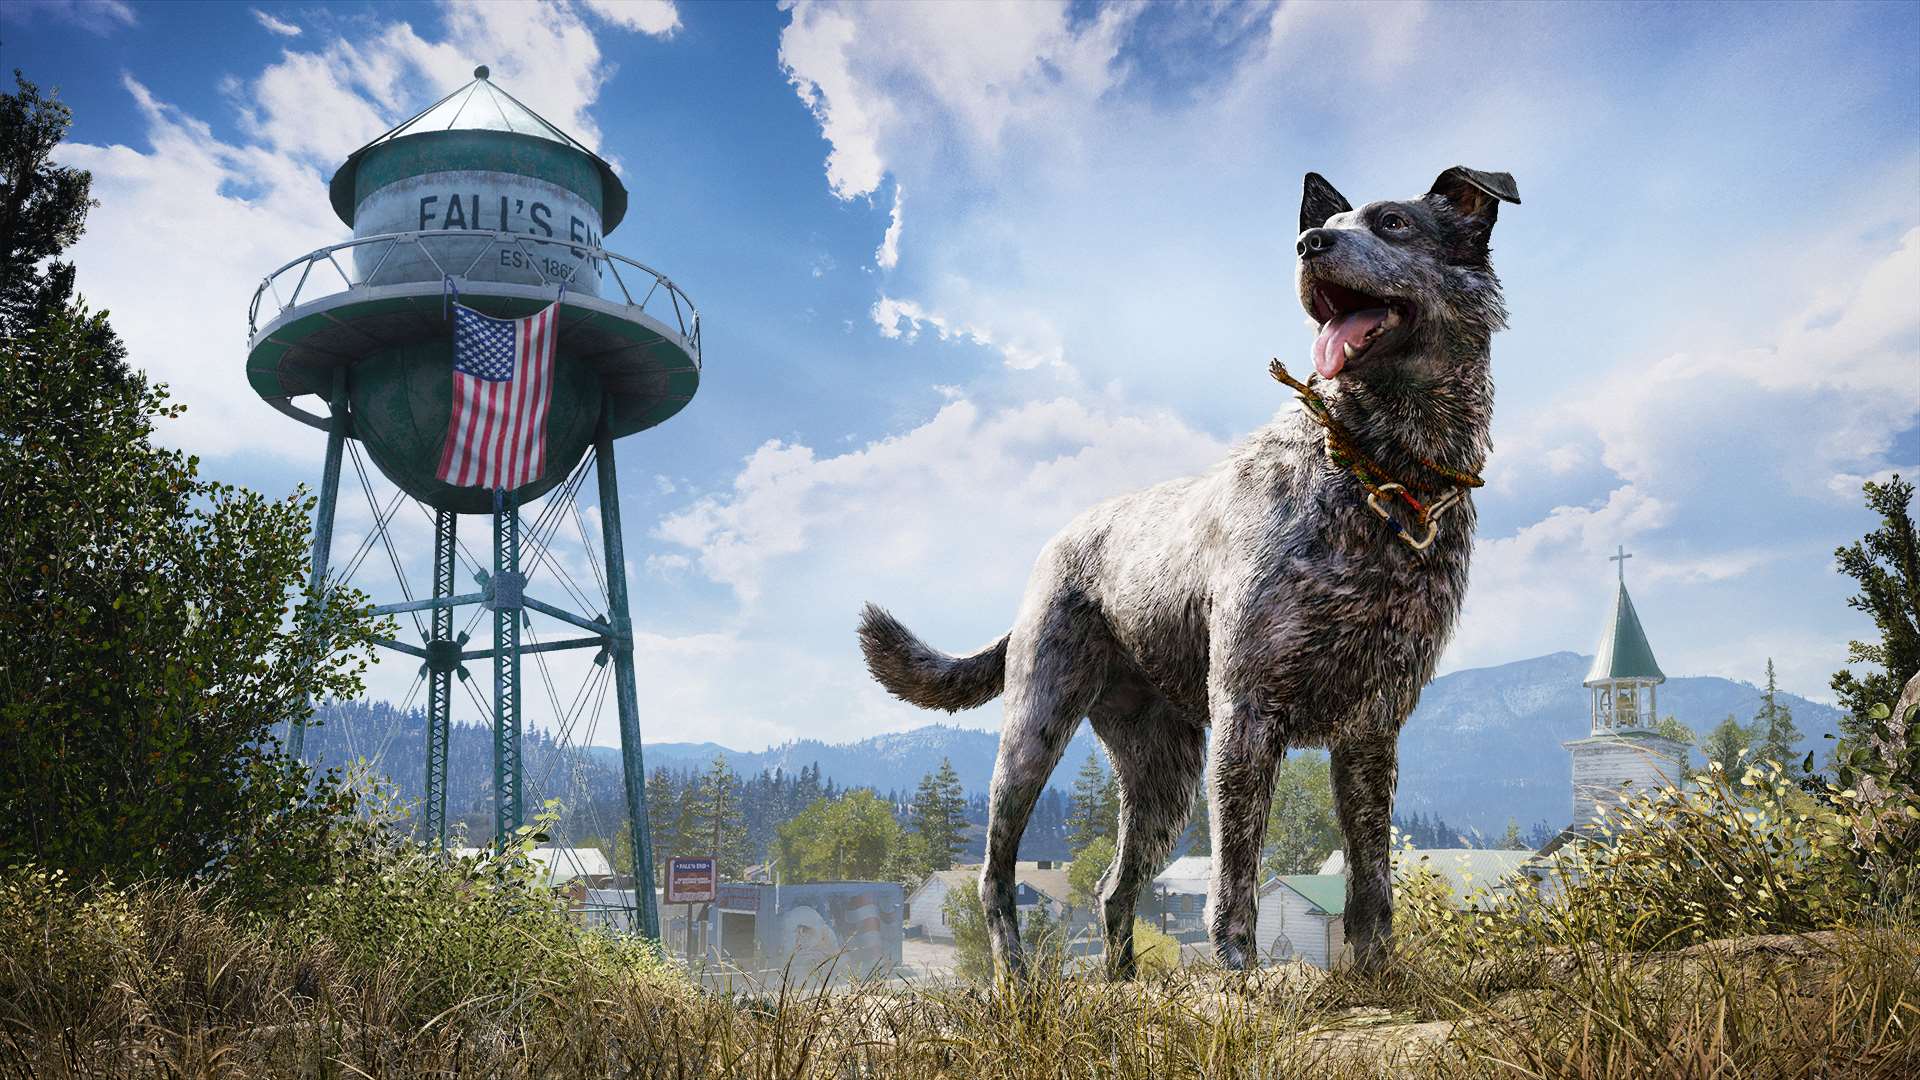 Unboxing Far Cry 5 - Play it like Boomer